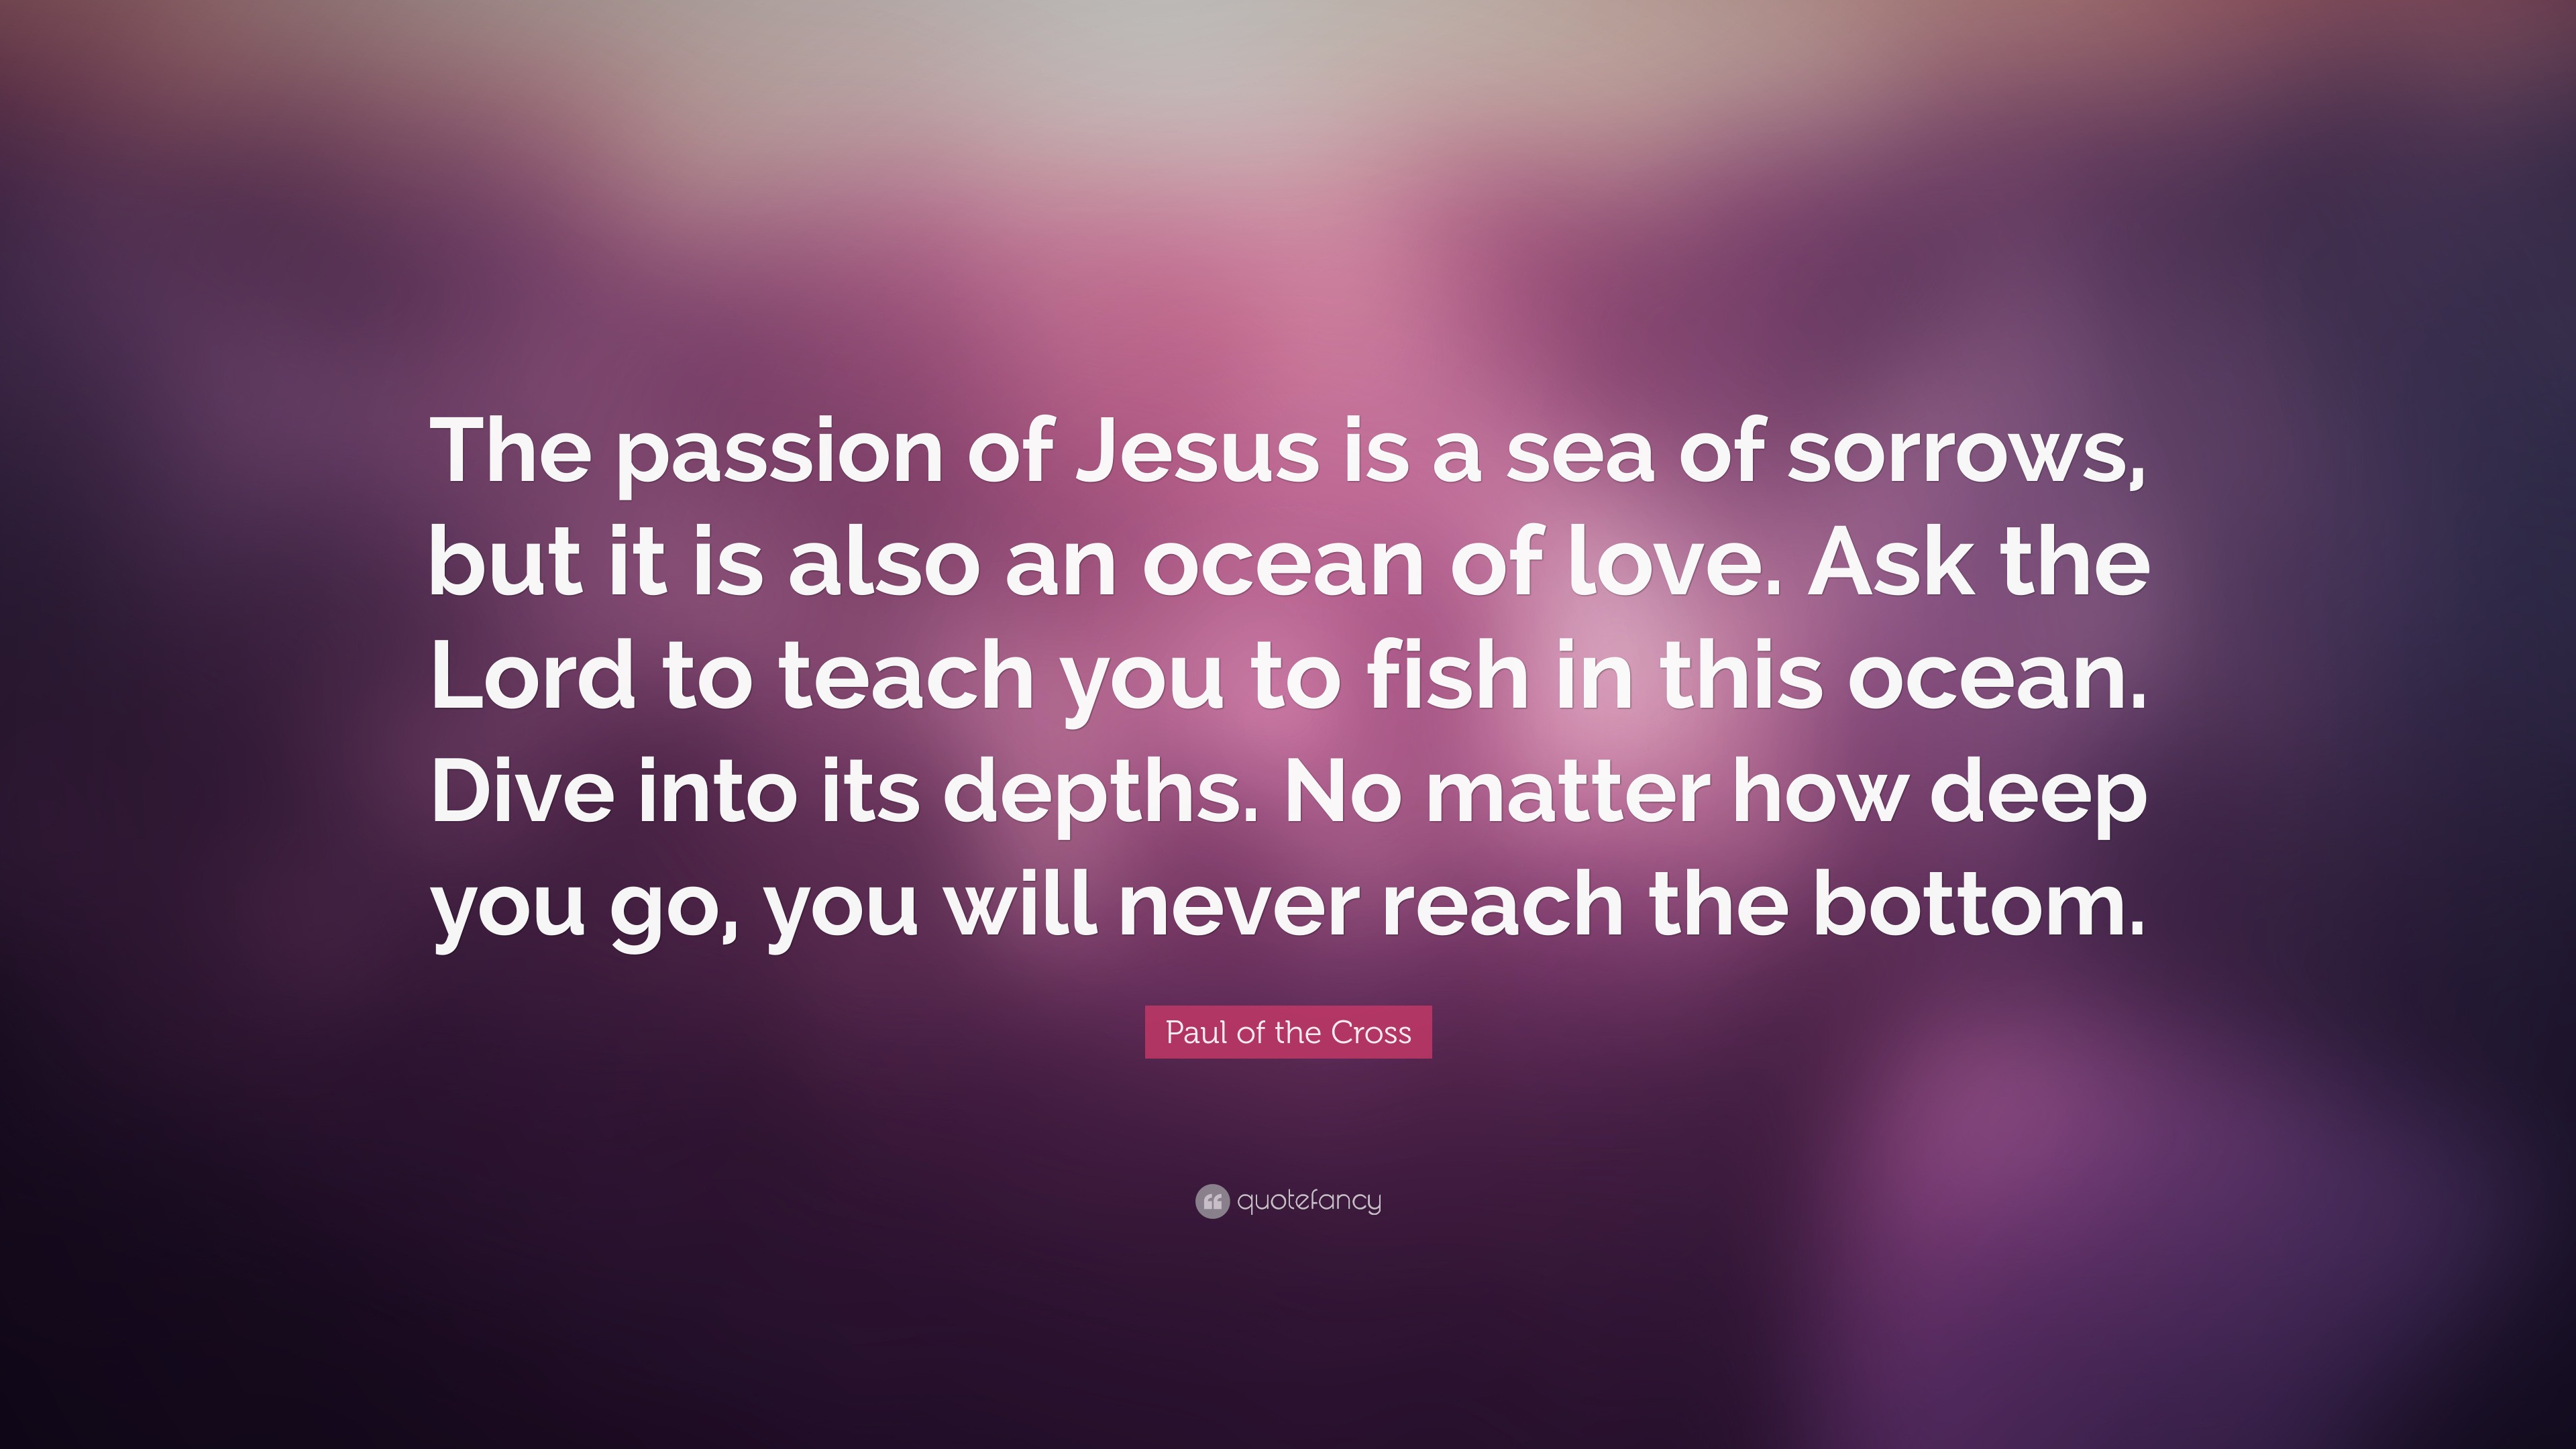 Paul of the Cross Quote “The passion of Jesus is a sea of sorrows